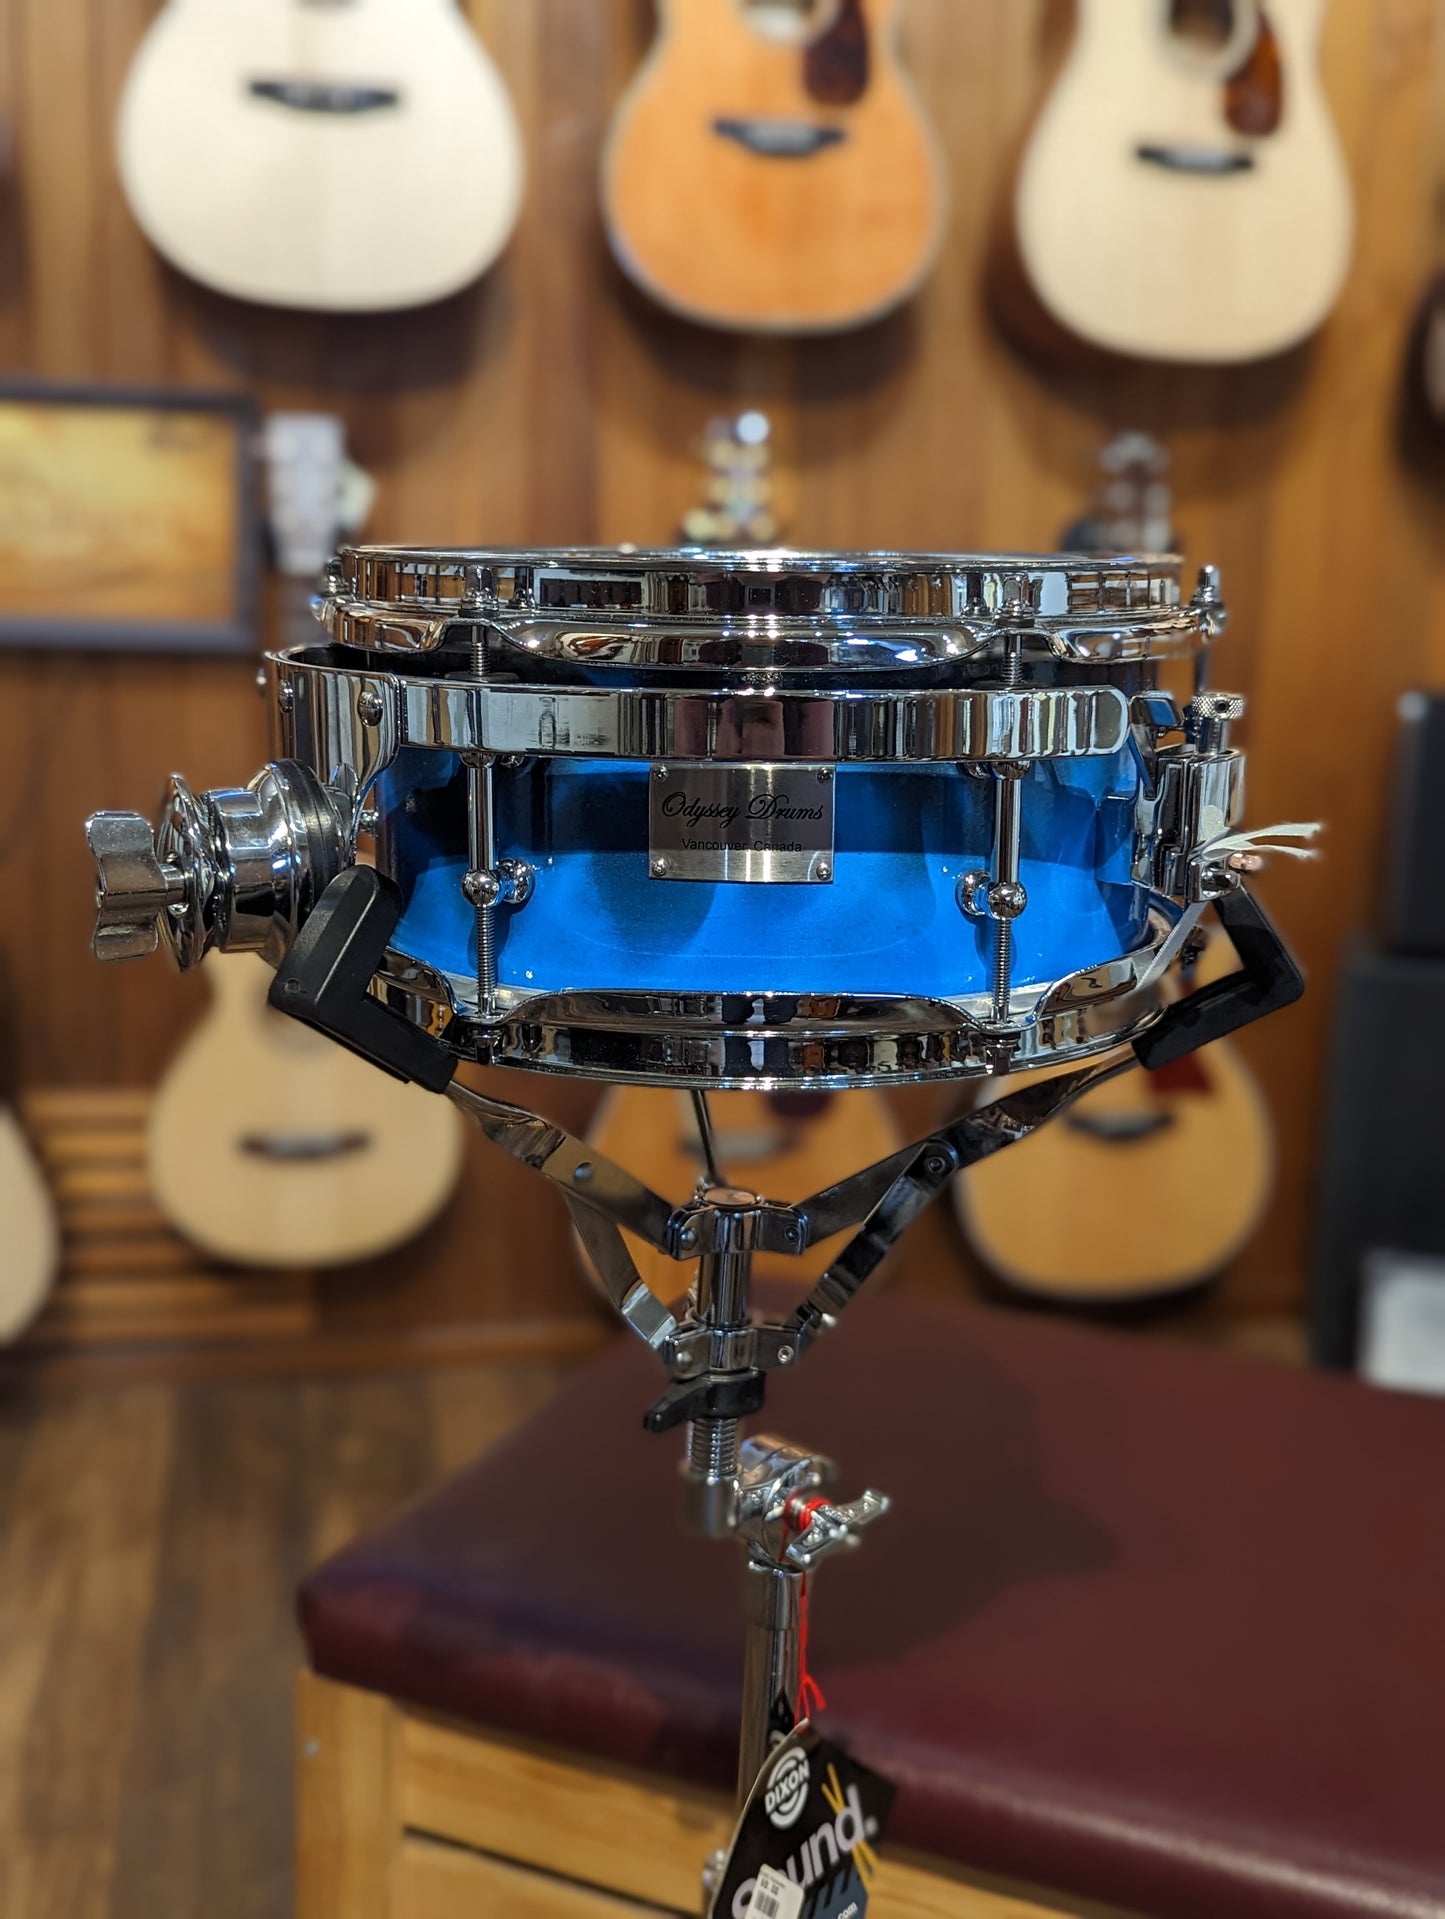 Odyssey Drums 10"x5" 6 Ply Maple Snare w/Mounting Hardware - Blue Flame